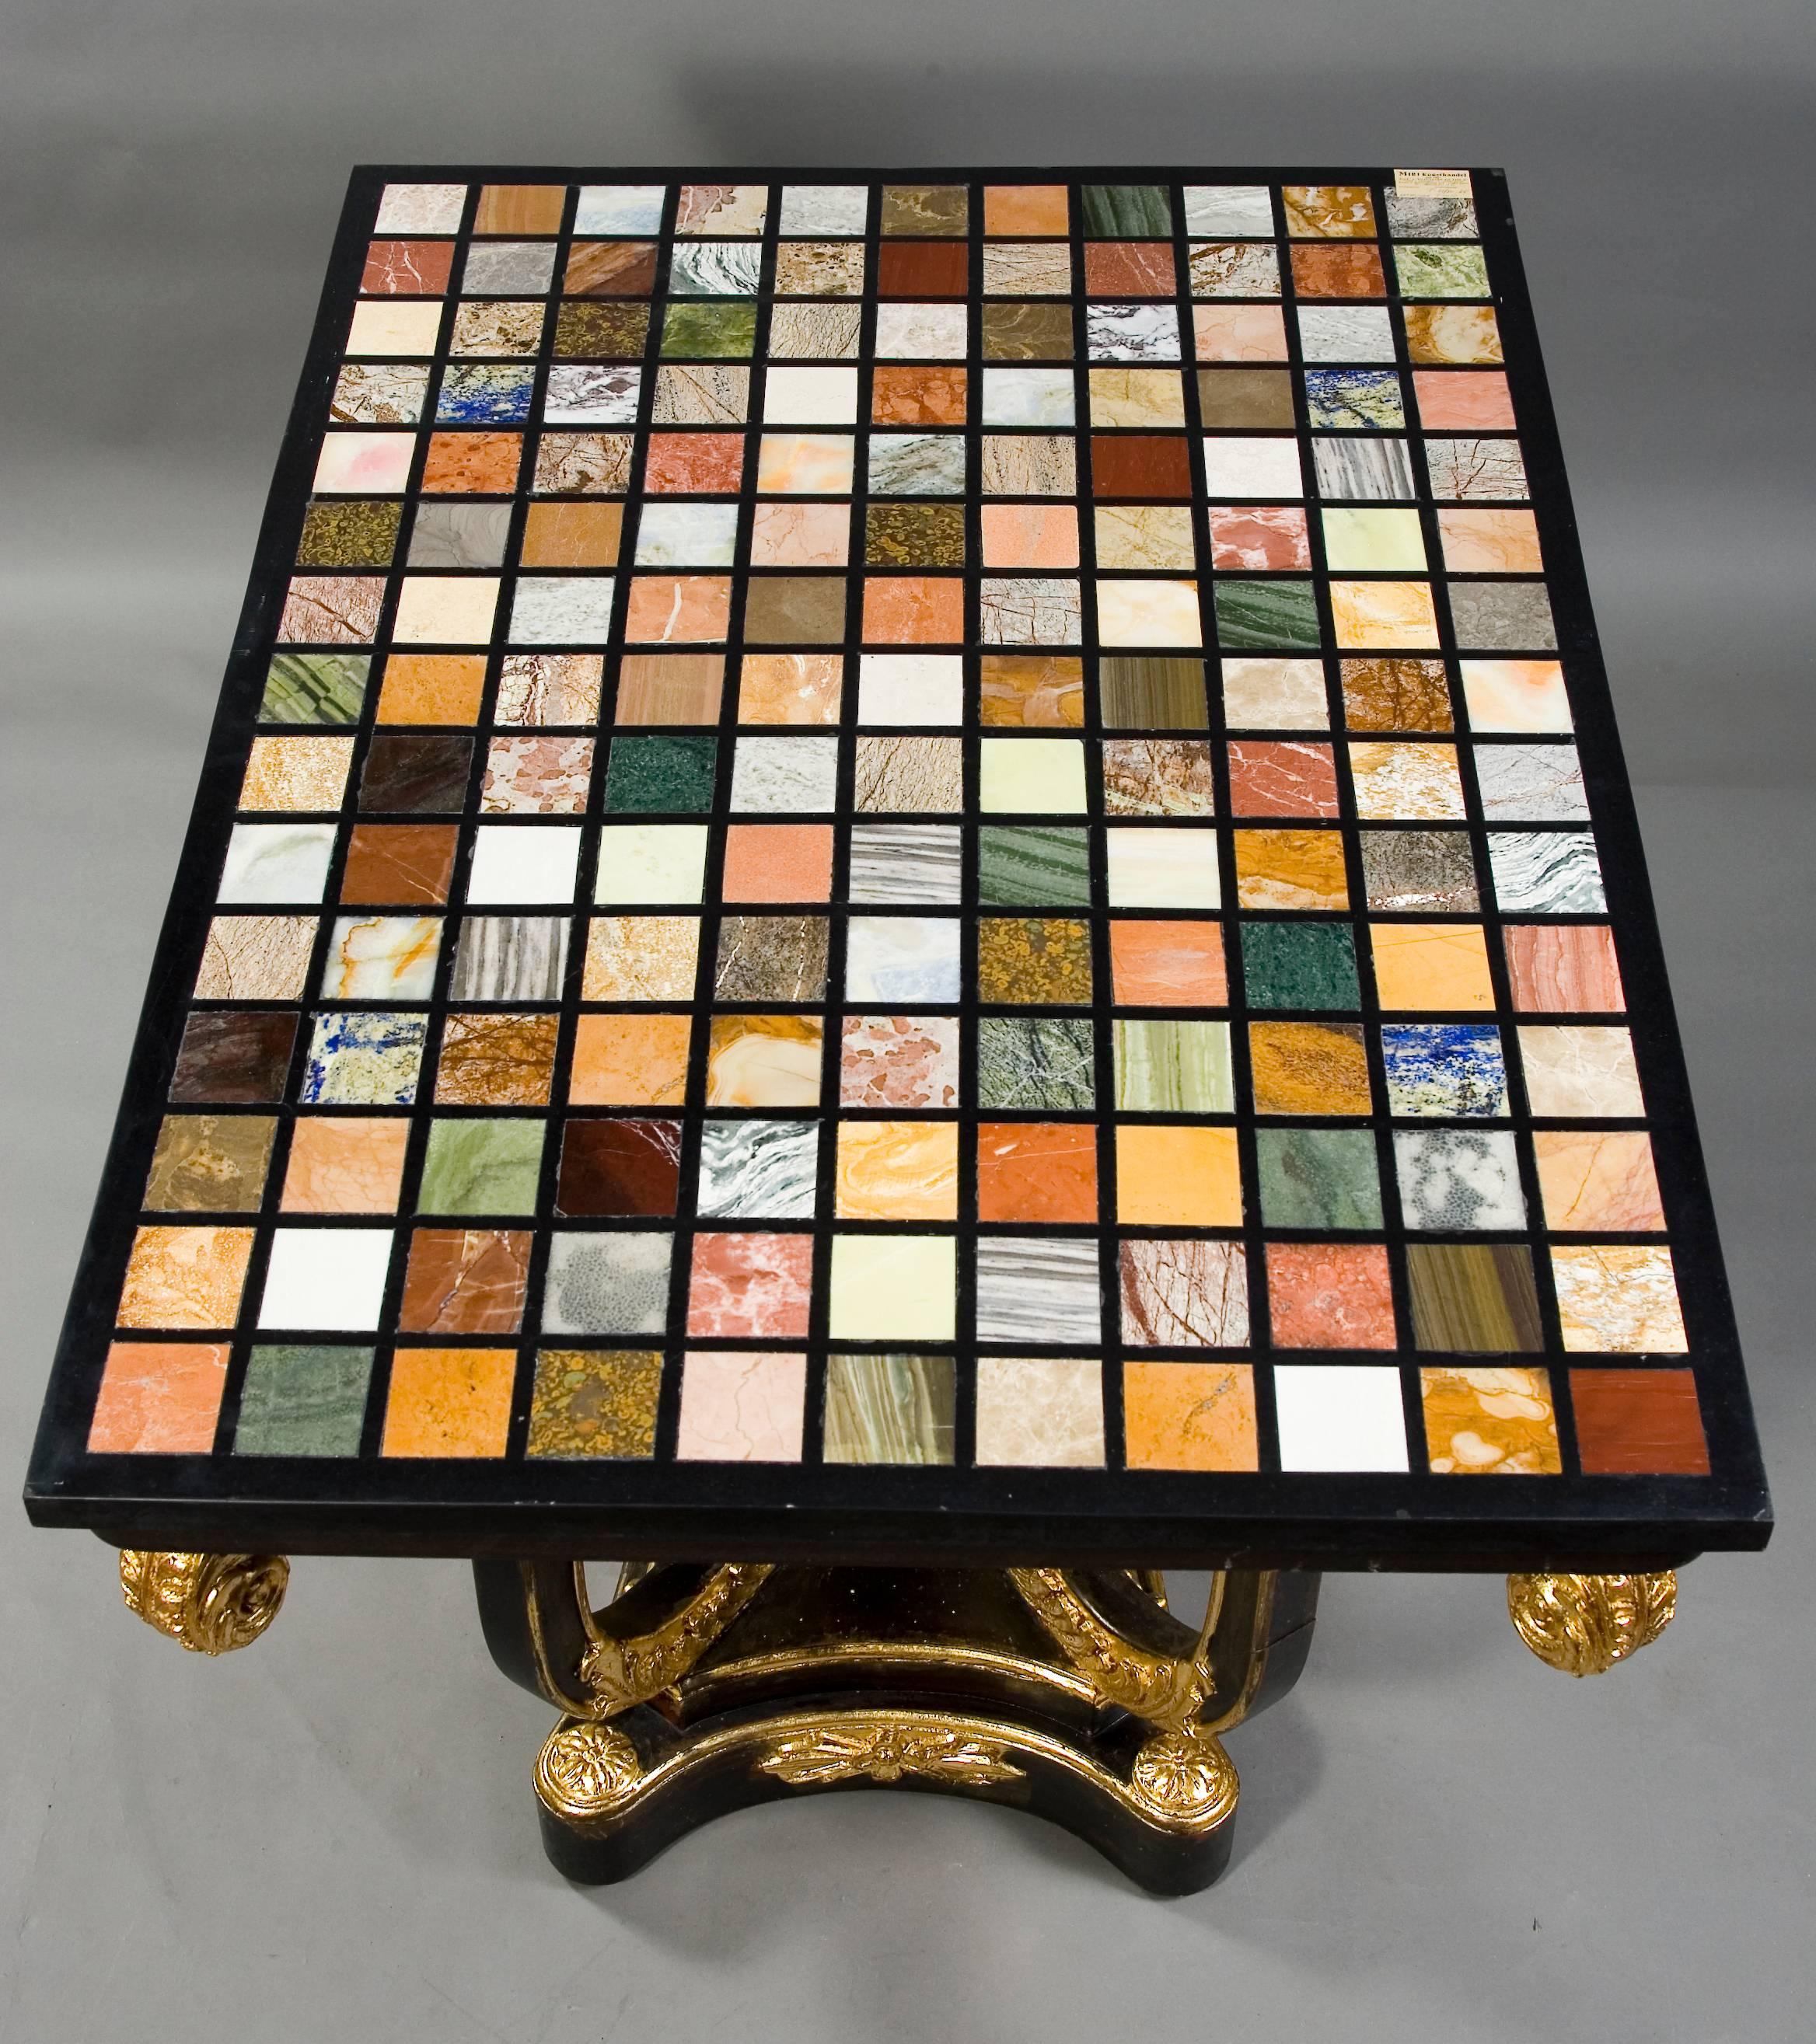 Neoclassical 20th Century Pietra-Dura Style of Classicism Table